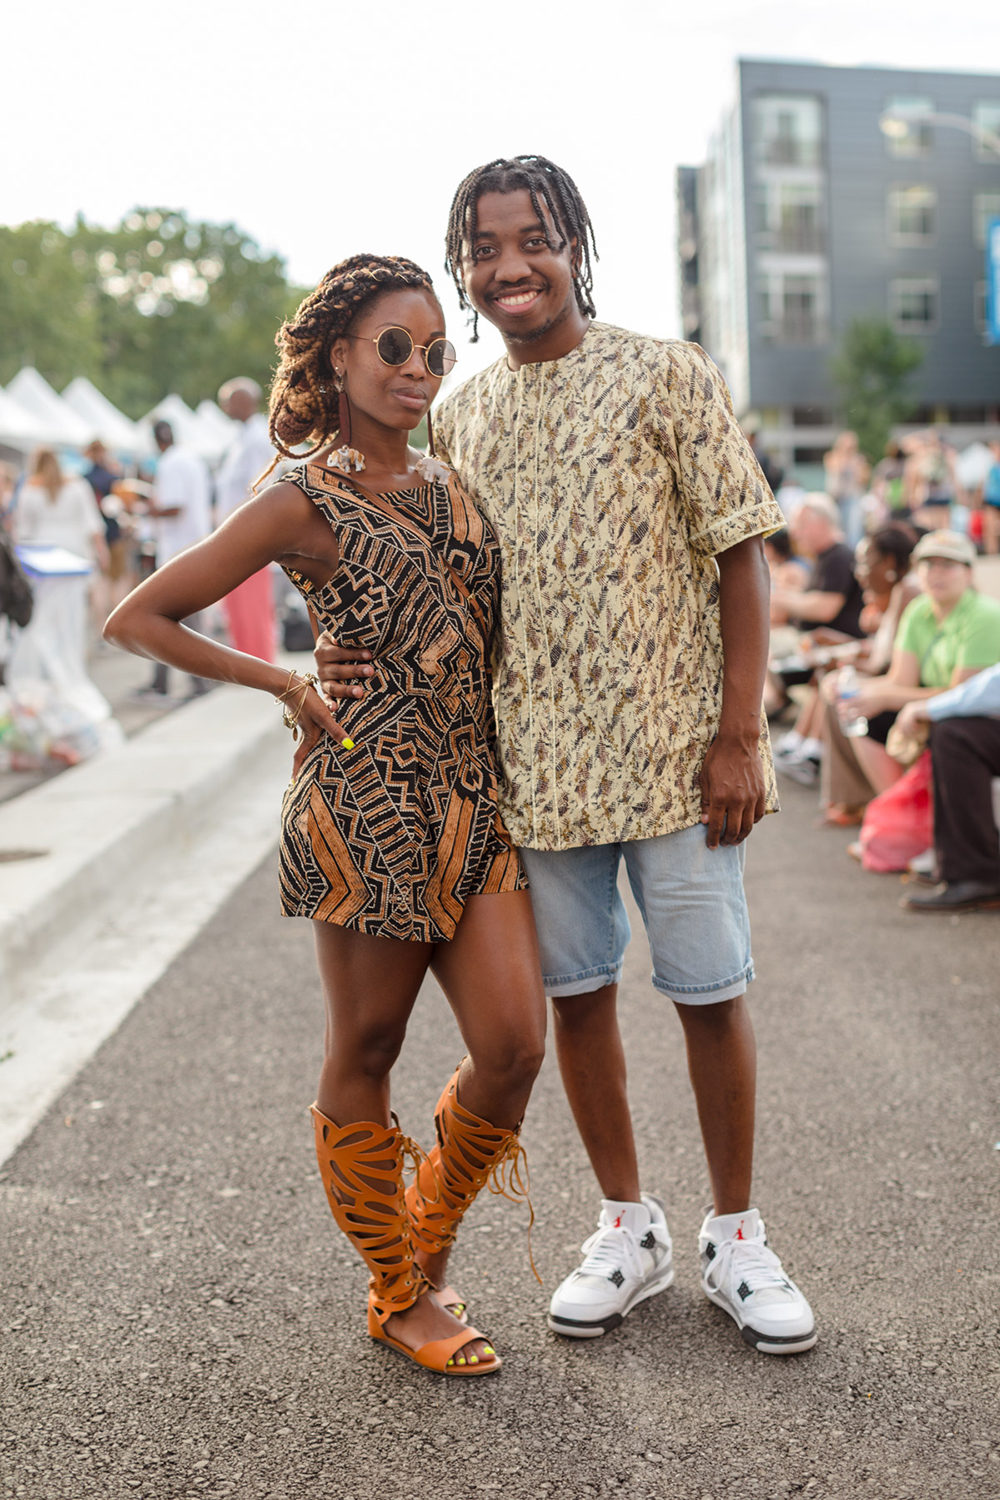 Artscape-Tracee-Bryant-Street-Style-at-Baltimore-2018-Artscape-photography-by-Armenyl-4.jpg#asset:64080